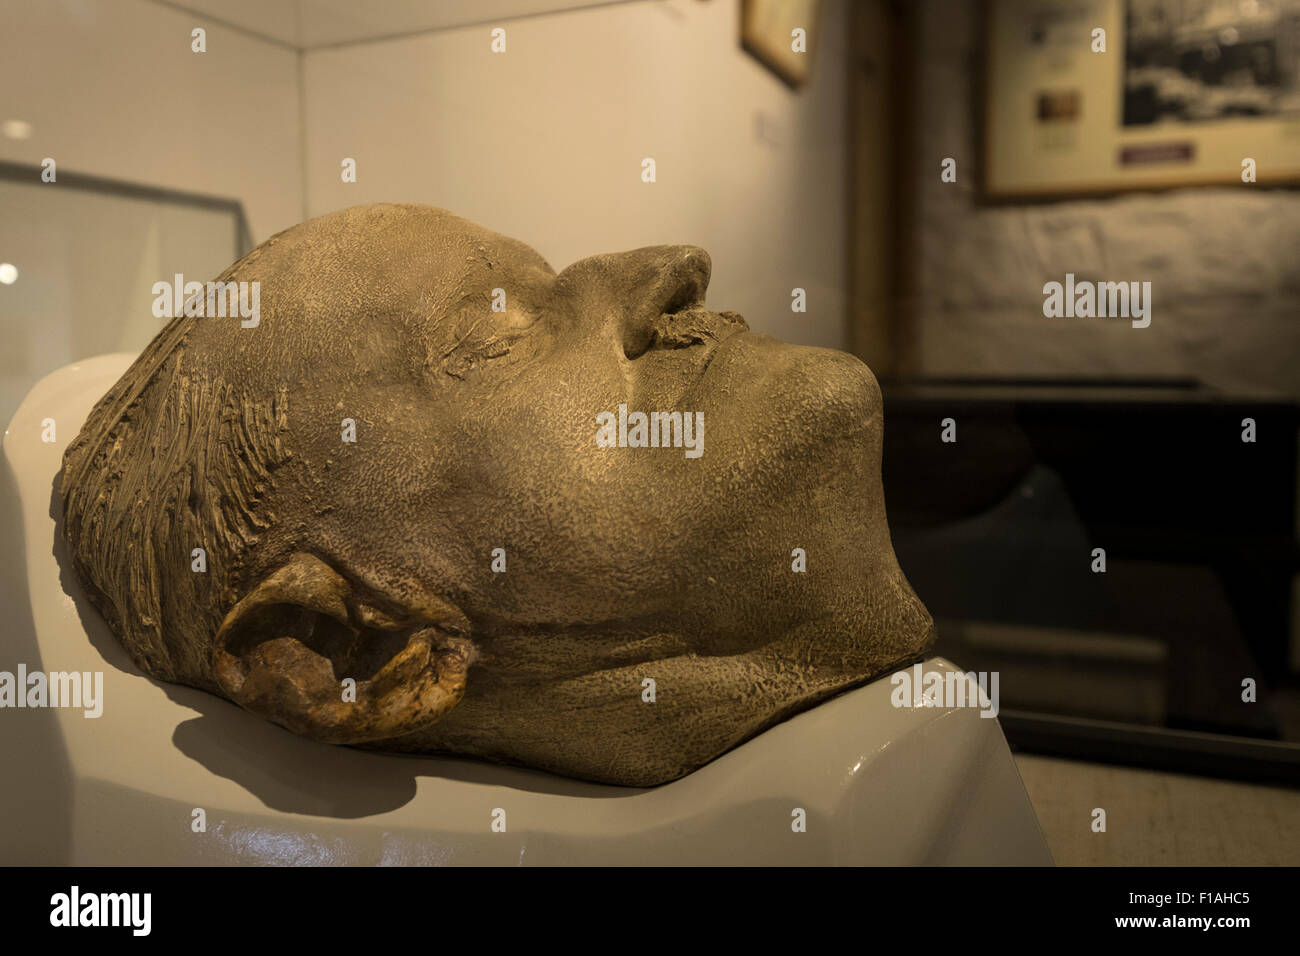 James Joyces death mask plastercast in the Martello Tower Museum in Sandycove, Dublin Ireland. Stock Photo